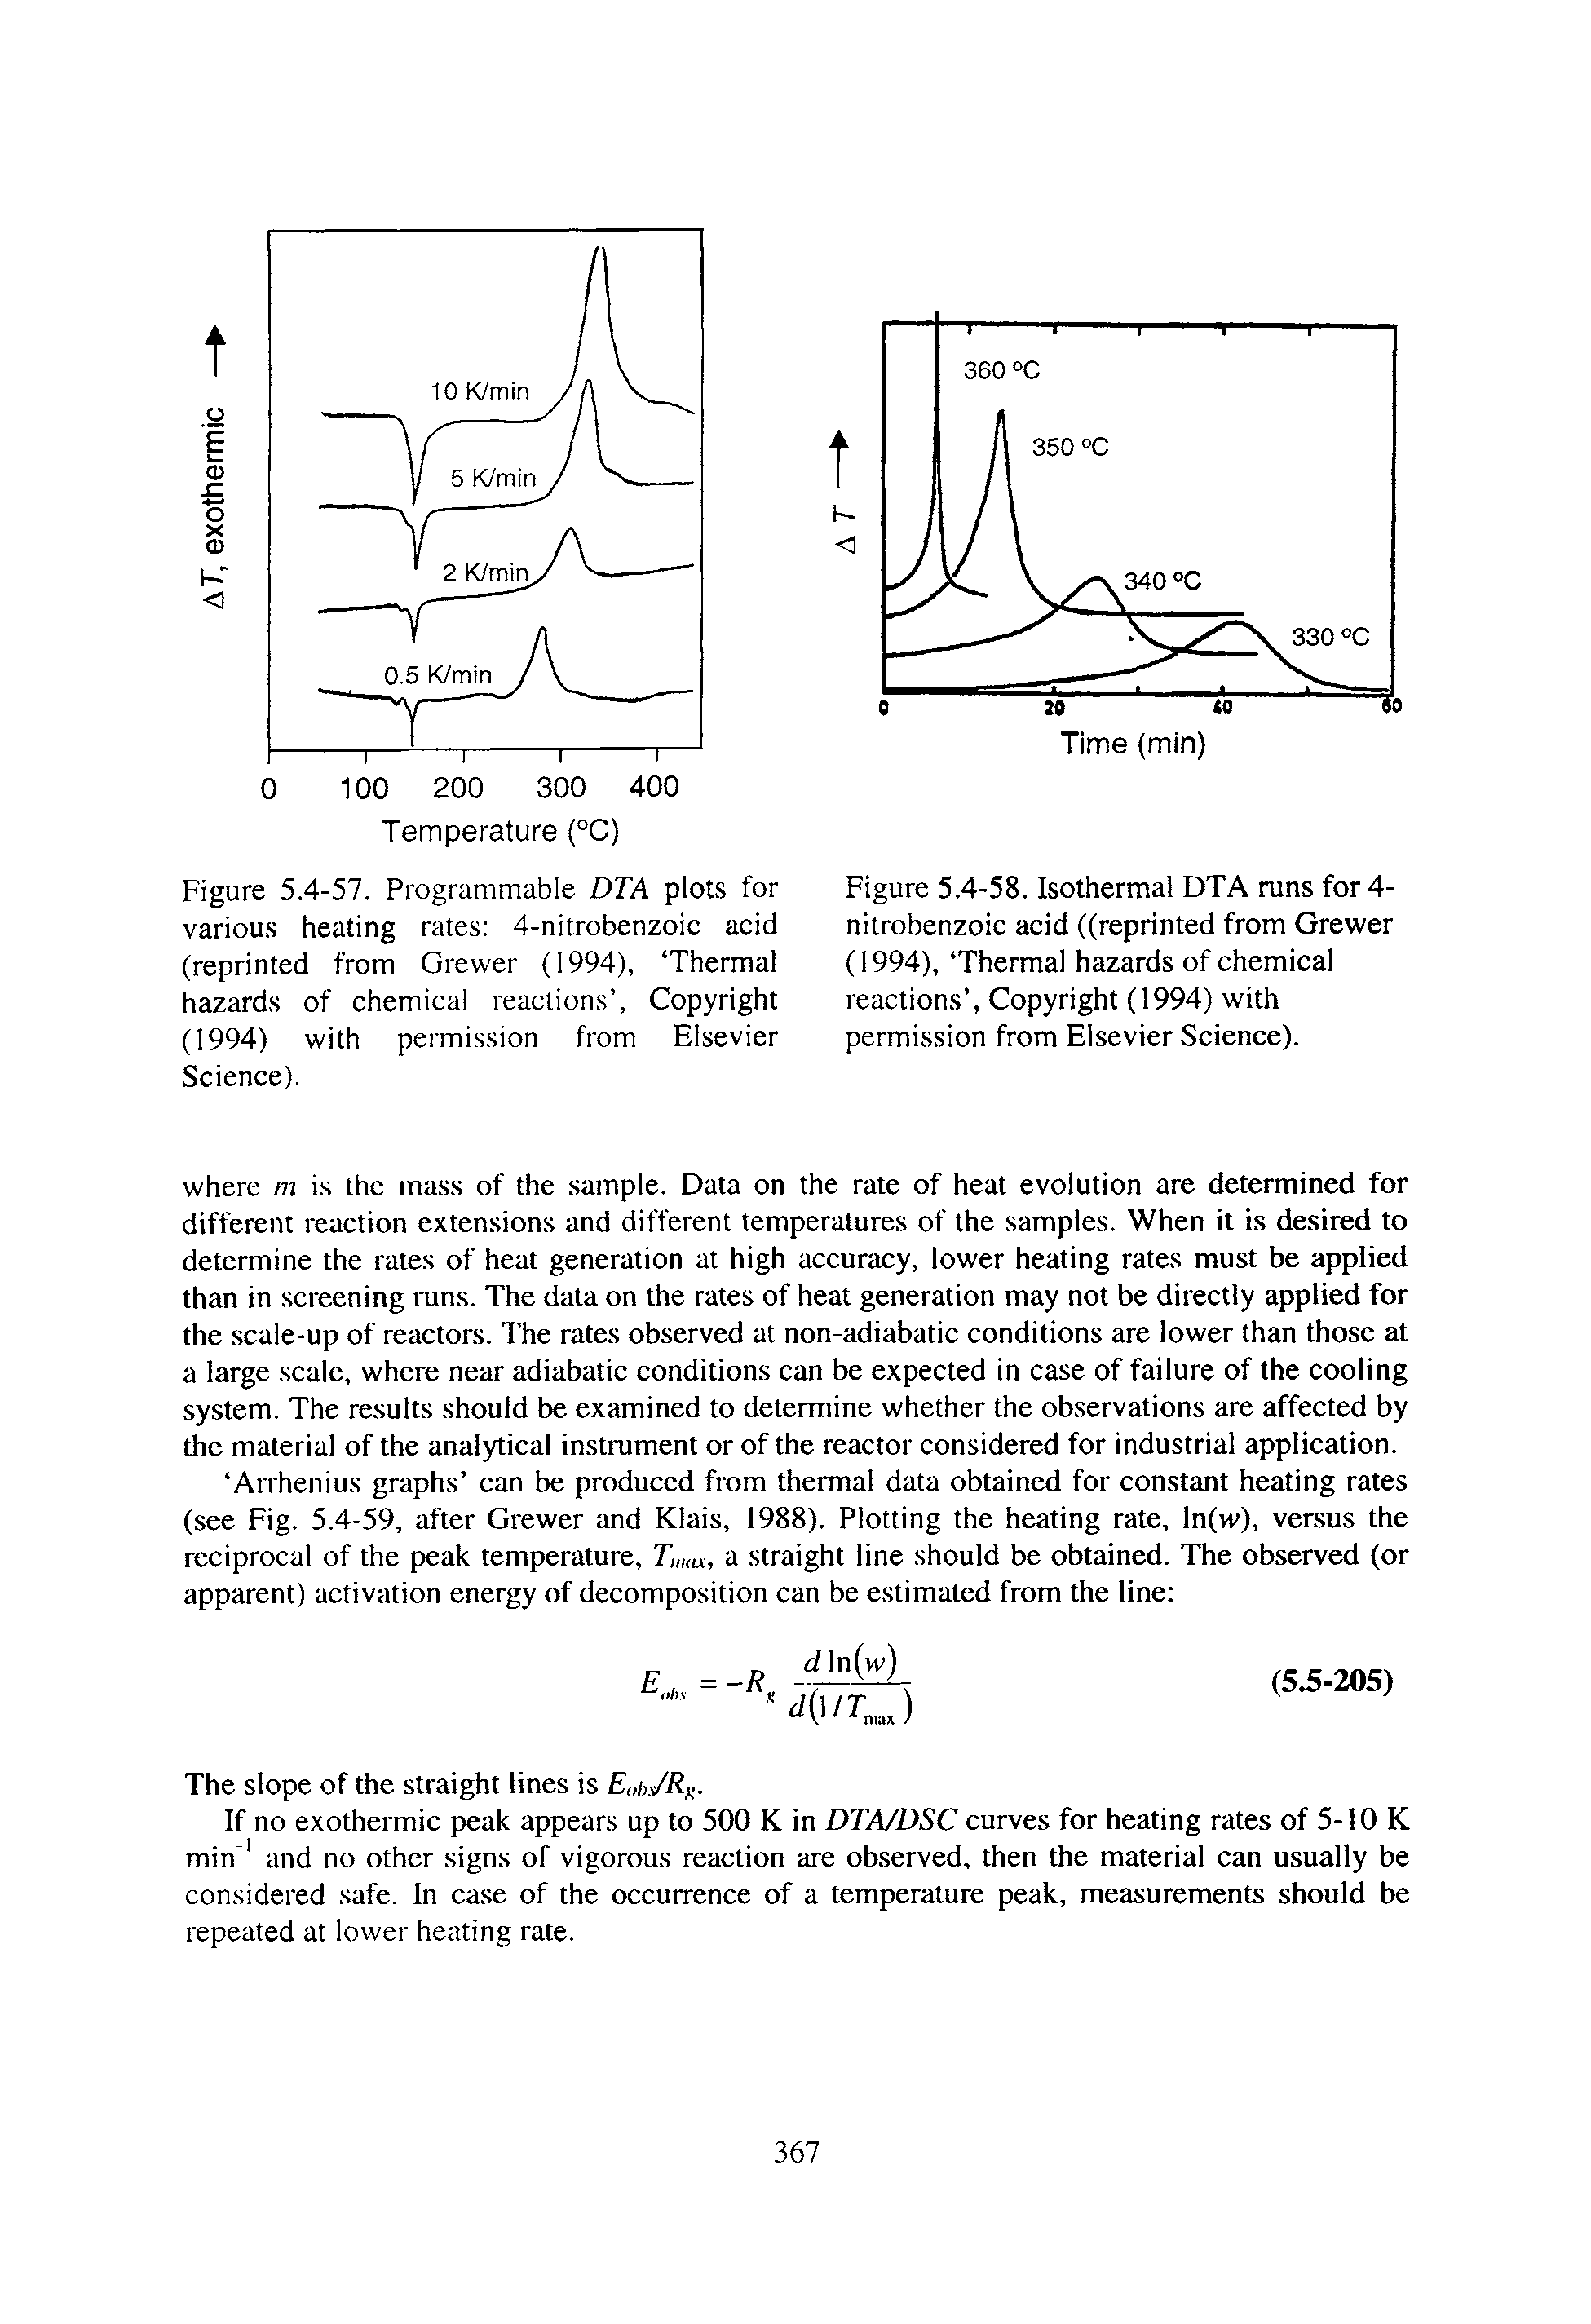 Figure 5.4-58. Isothermal DTA runs for 4-nitrobenzoic acid ((reprinted from Grewer (1994), Thermal hazards of chemical reactions . Copyright (1994) with permission from Elsevier Science).